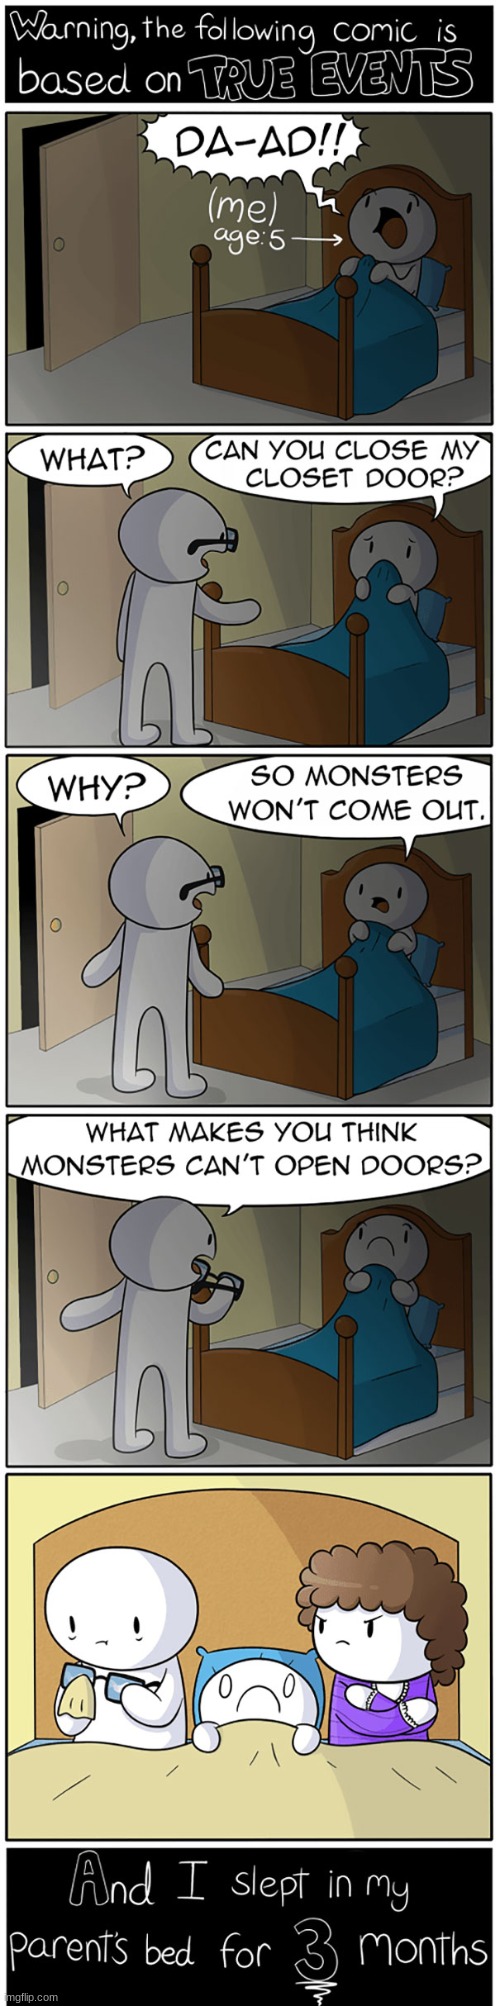 A true comic | image tagged in memes,theodd1sout,comics | made w/ Imgflip meme maker